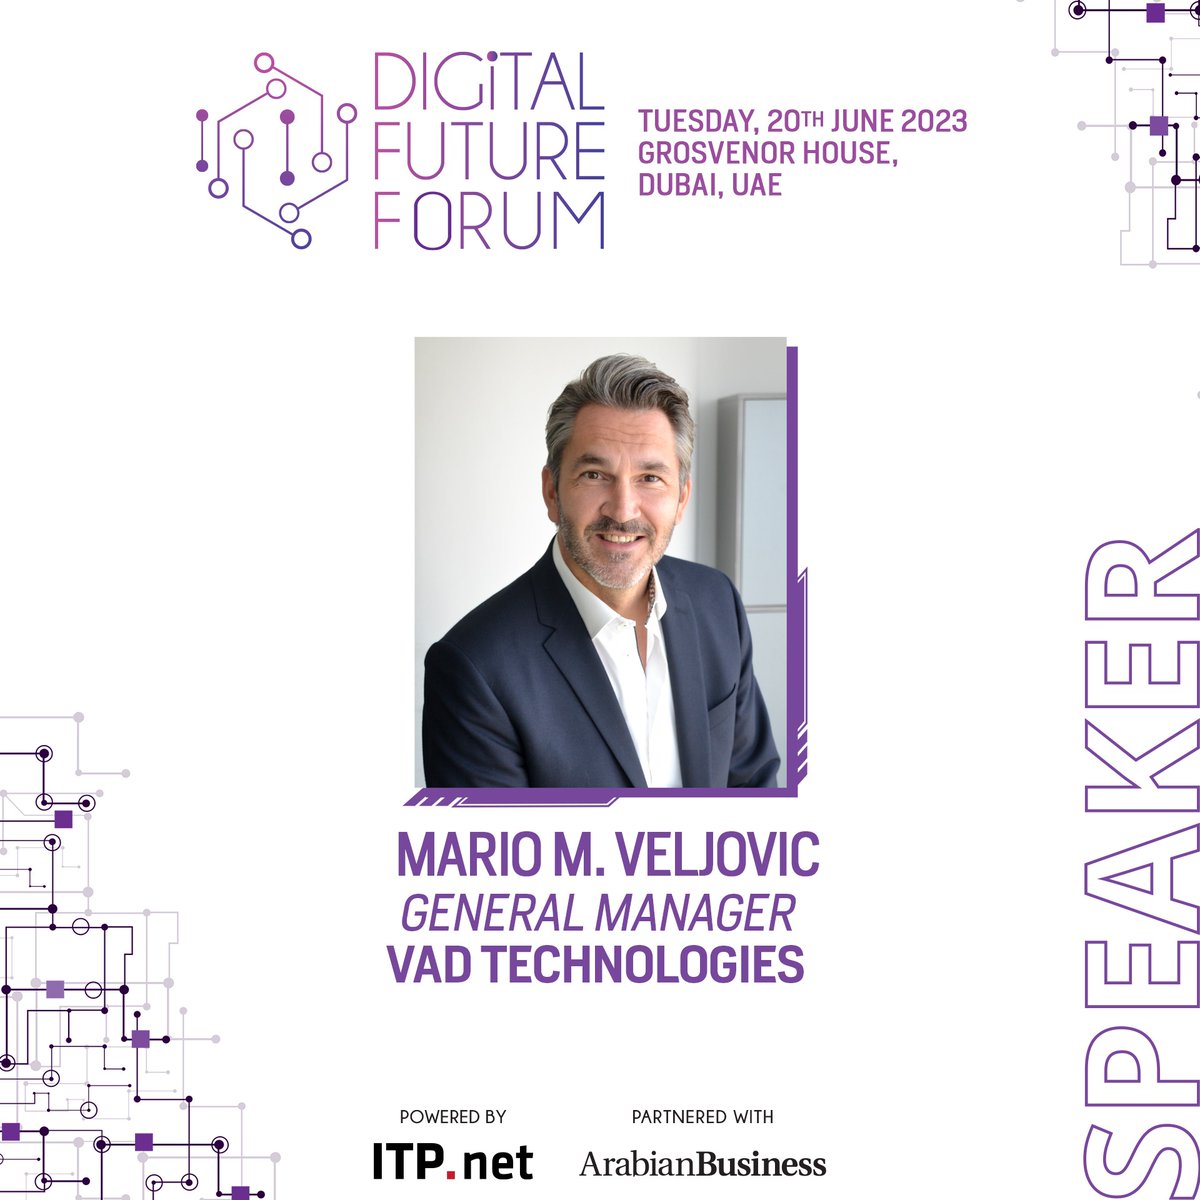 📢 Join us at the Digital Future Forum for an engaging panel discussion featuring, @vadtechnologies, General Manager, Mario M. Veljovic

📅 Date: 20 June 2023
🌍 Venue: Grosvenor House, Dubai
🔗 Register: zurl.co/X1Cm

Register to attend the Digital Future Forum now!